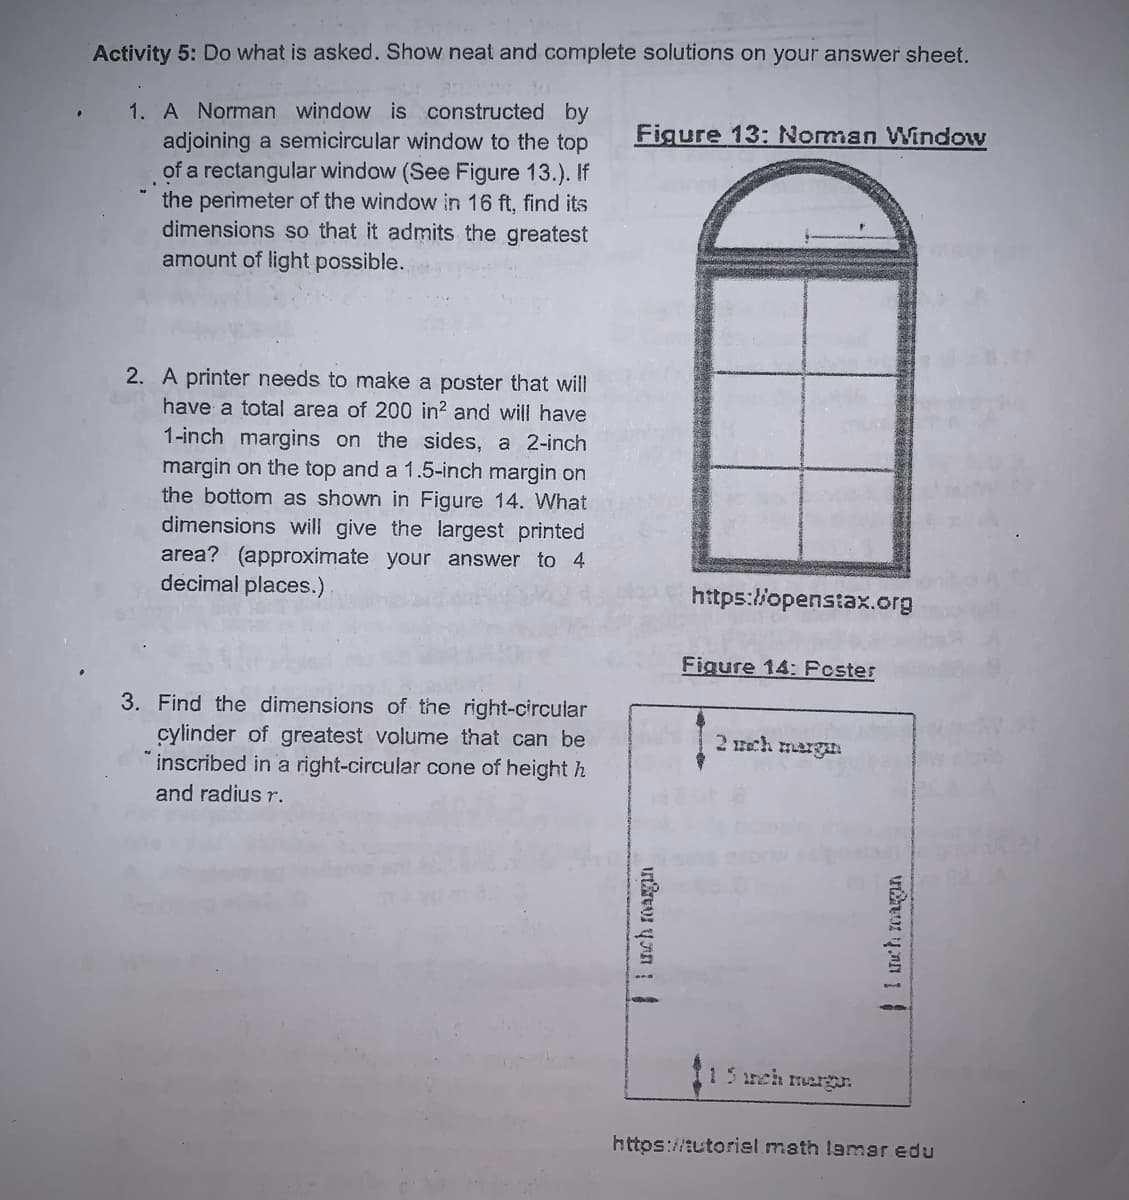 Activity 5: Do what is asked. Show neat and complete solutions on your answer sheet.
1. A Norman window is constructed by
adjoining a semicircular window to the top
of a rectangular window (See Figure 13.). If
the perimeter of the window in 16 ft, find its
dimensions so that it admits the greatest
amount of light possible.
Figure 13: Norman Window
2. A printer needs to make a poster that will
have a total area of 200 in? and will have
1-inch margins on the sides, a 2-inch
margin on the top and a 1.5-inch margin on
the bottom as shown in Figure 14. What
dimensions will give the largest printed
area? (approximate your answer to 4
decimal places.)
https:/l/openstax.org
Figure 14: Fcster
3. Find the dimensions of the right-circular
cylinder of greatest volume that can be
inscribed in a right-circular cone of height h
2 mch mergan
and radius r.
15 meh margr.
https://tutorisel math lamar edu
